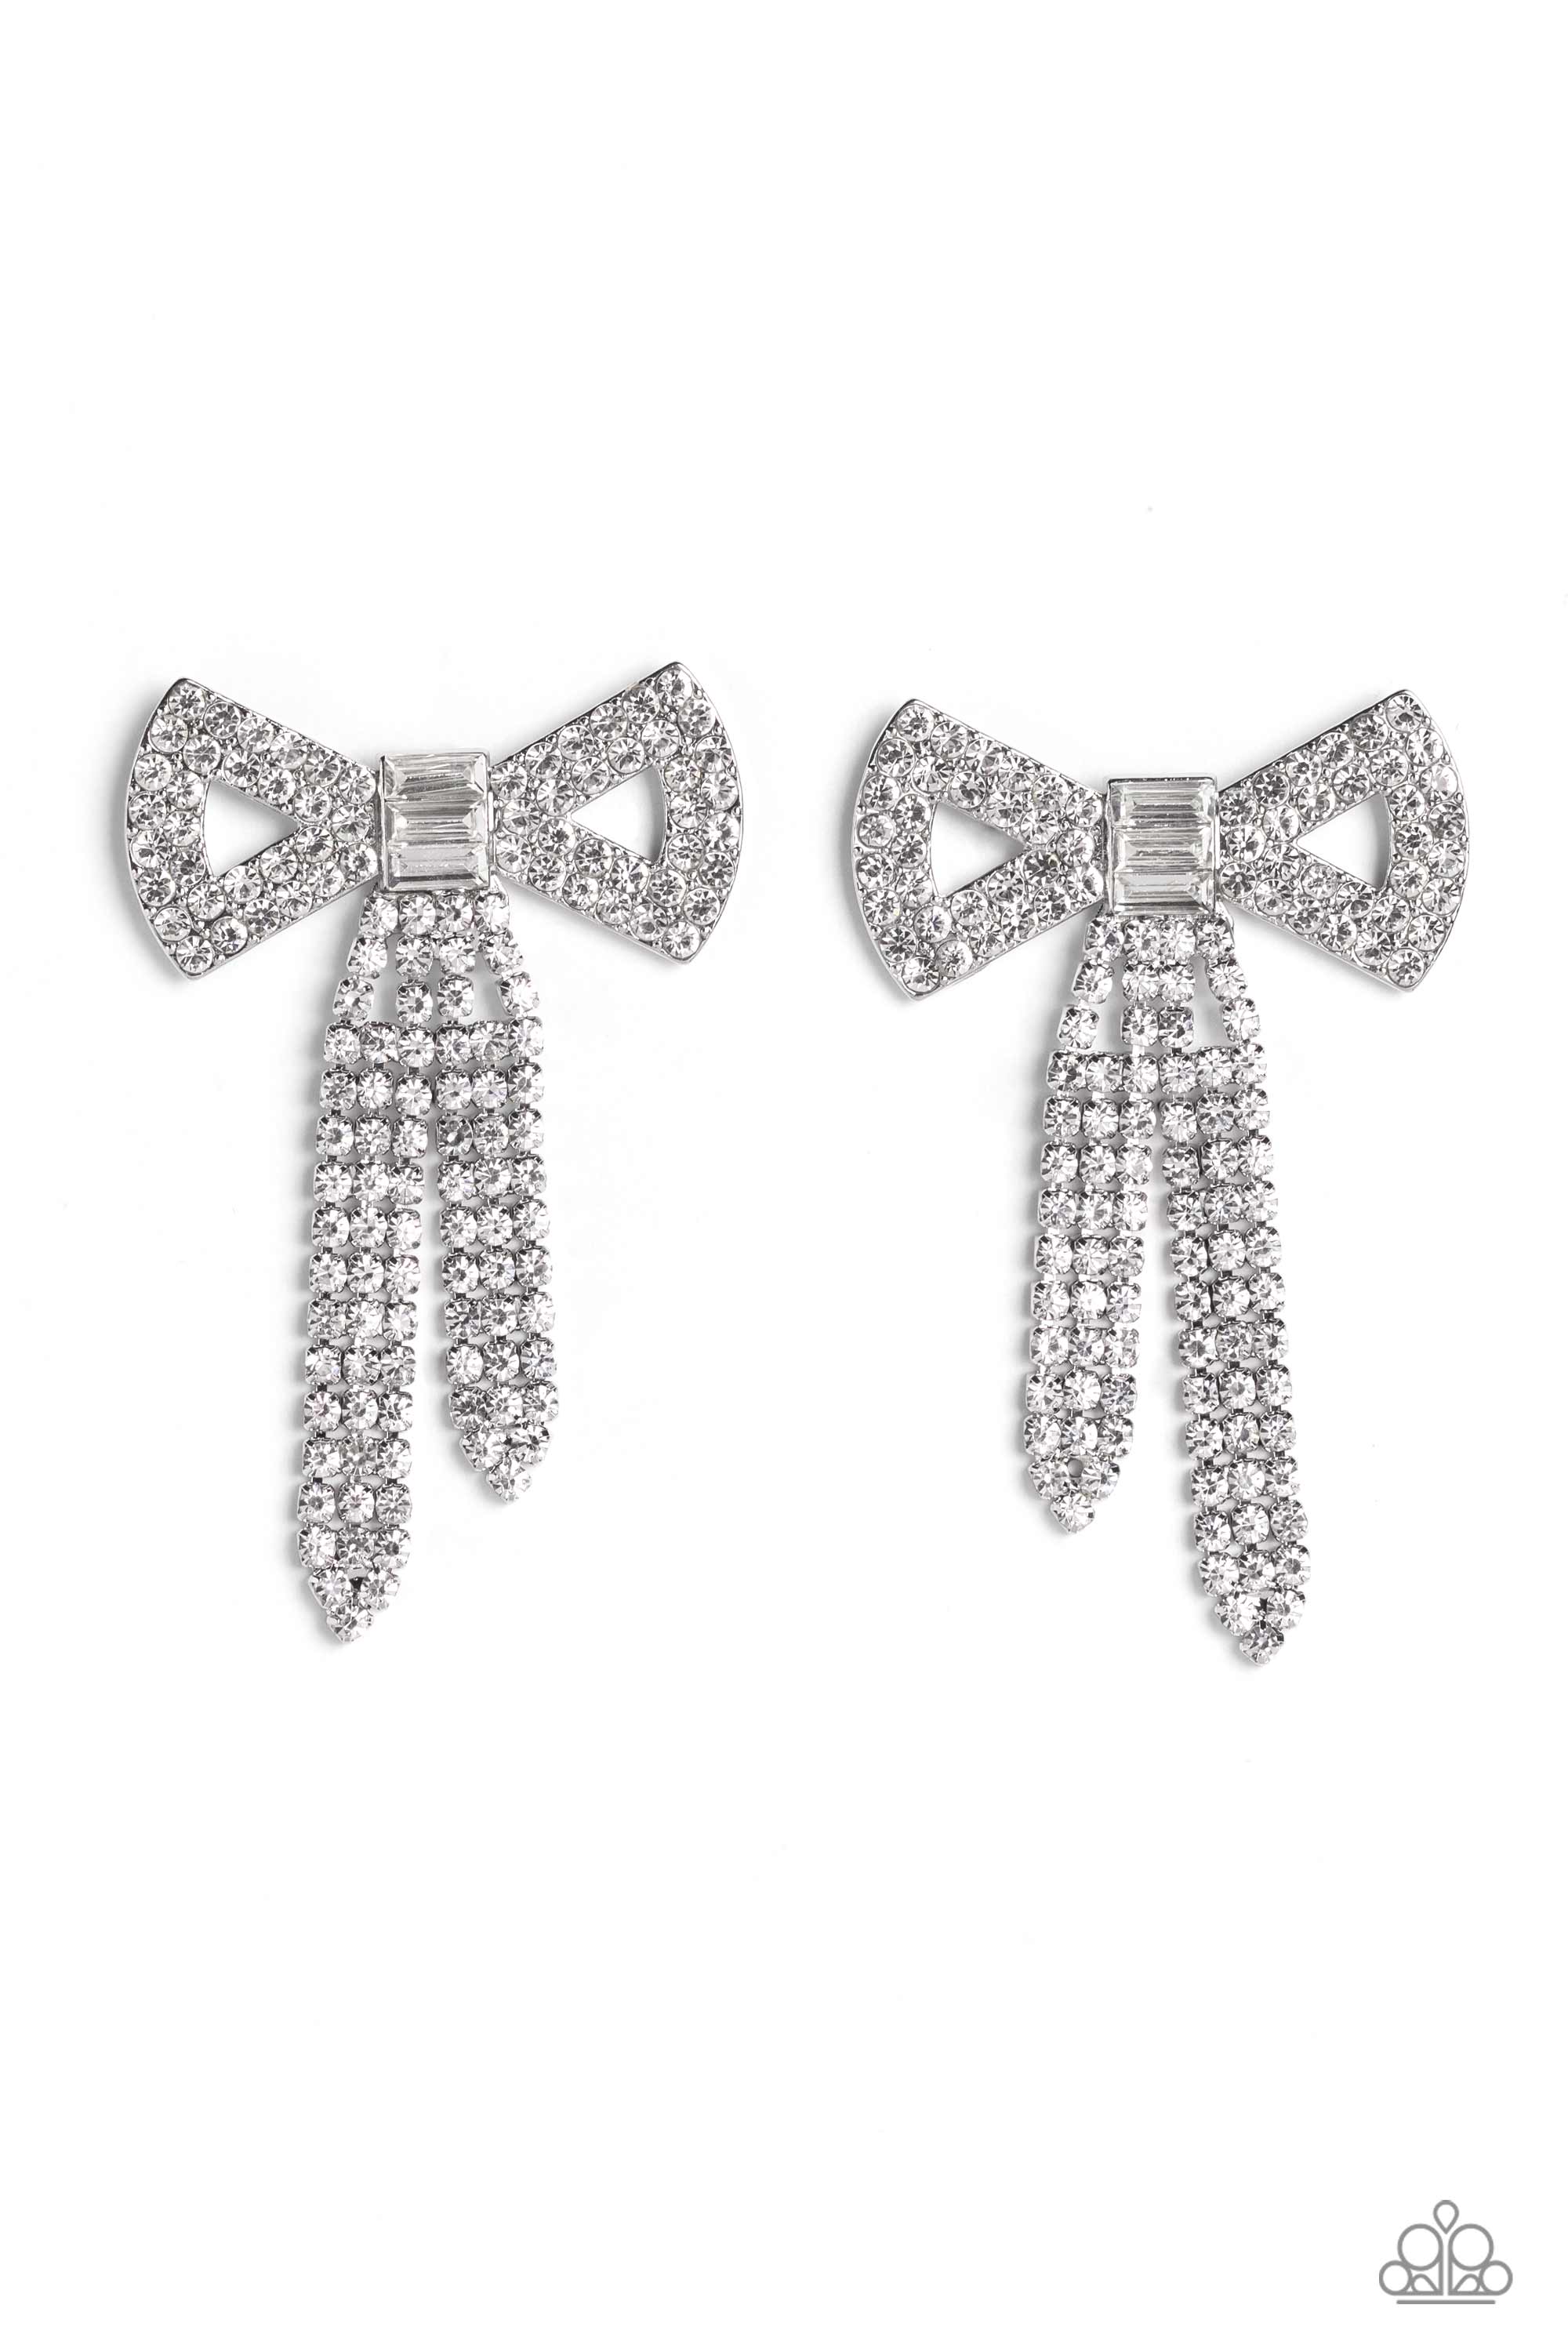 Just BOW With It White Rhinestone Earrings - Paparazzi Accessories- lightbox - CarasShop.com - $5 Jewelry by Cara Jewels